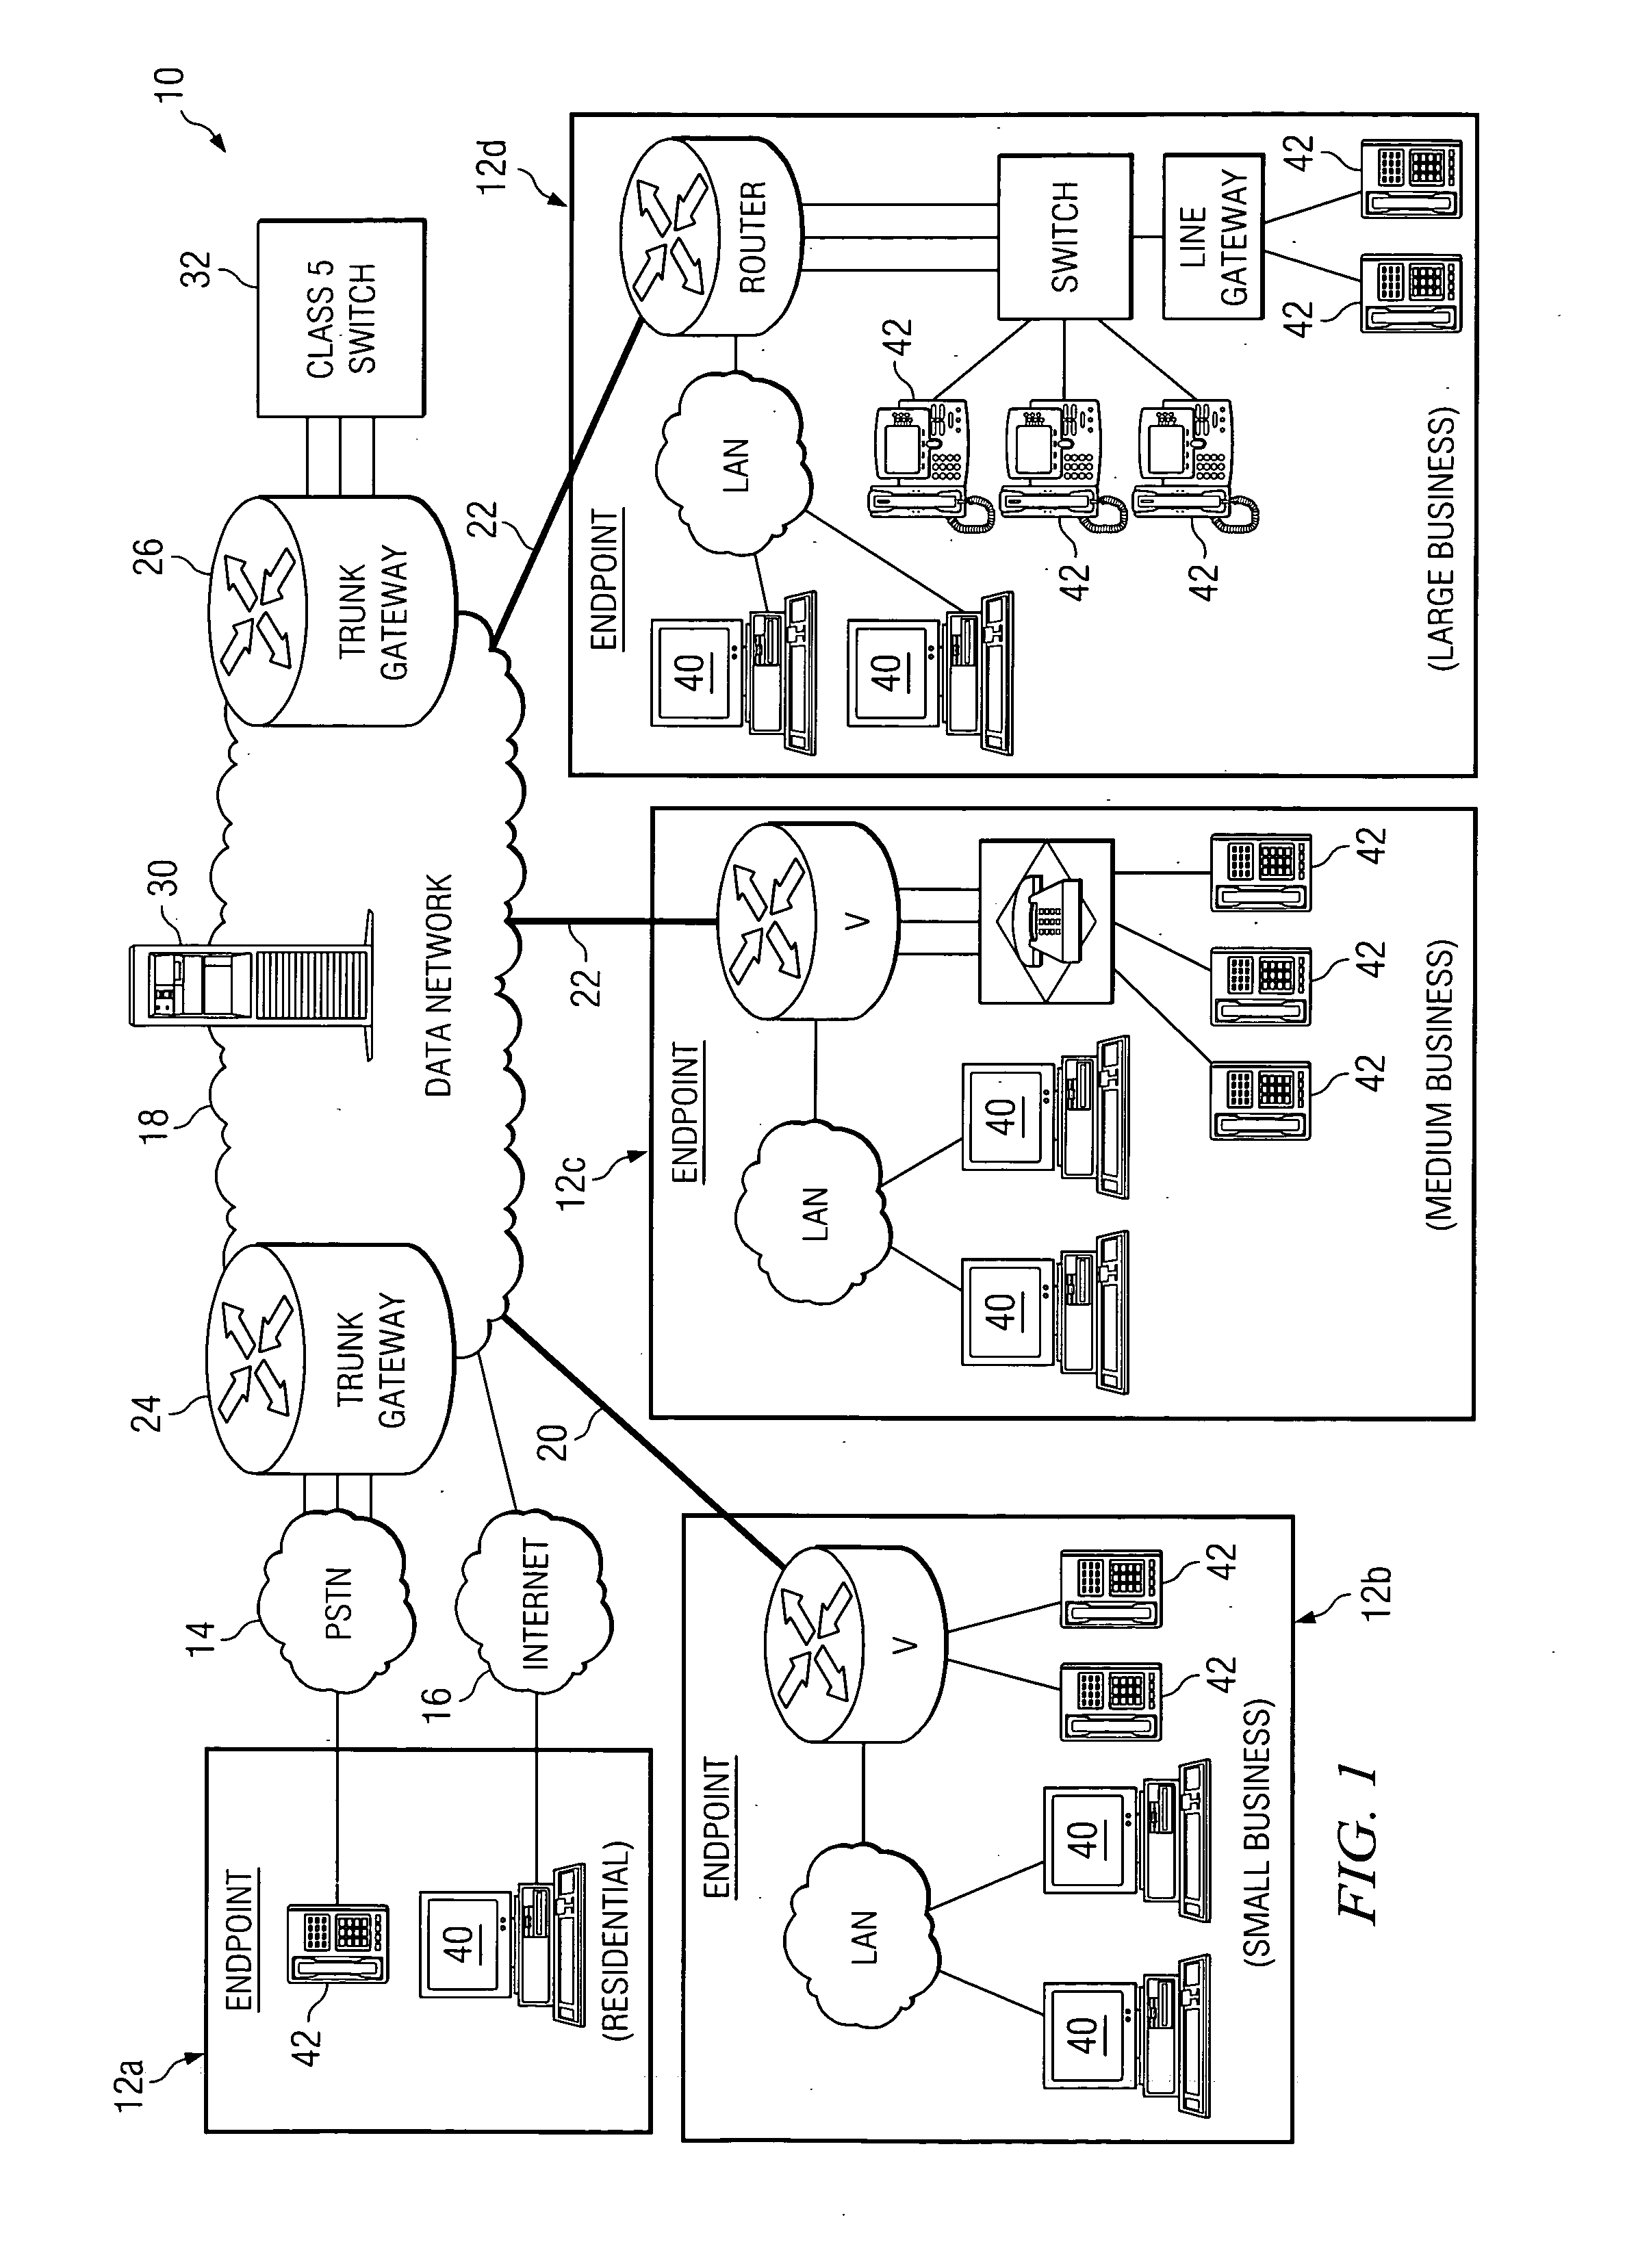 System and method for providing an eCamp feature in a session initiation protocol (SIP) environment